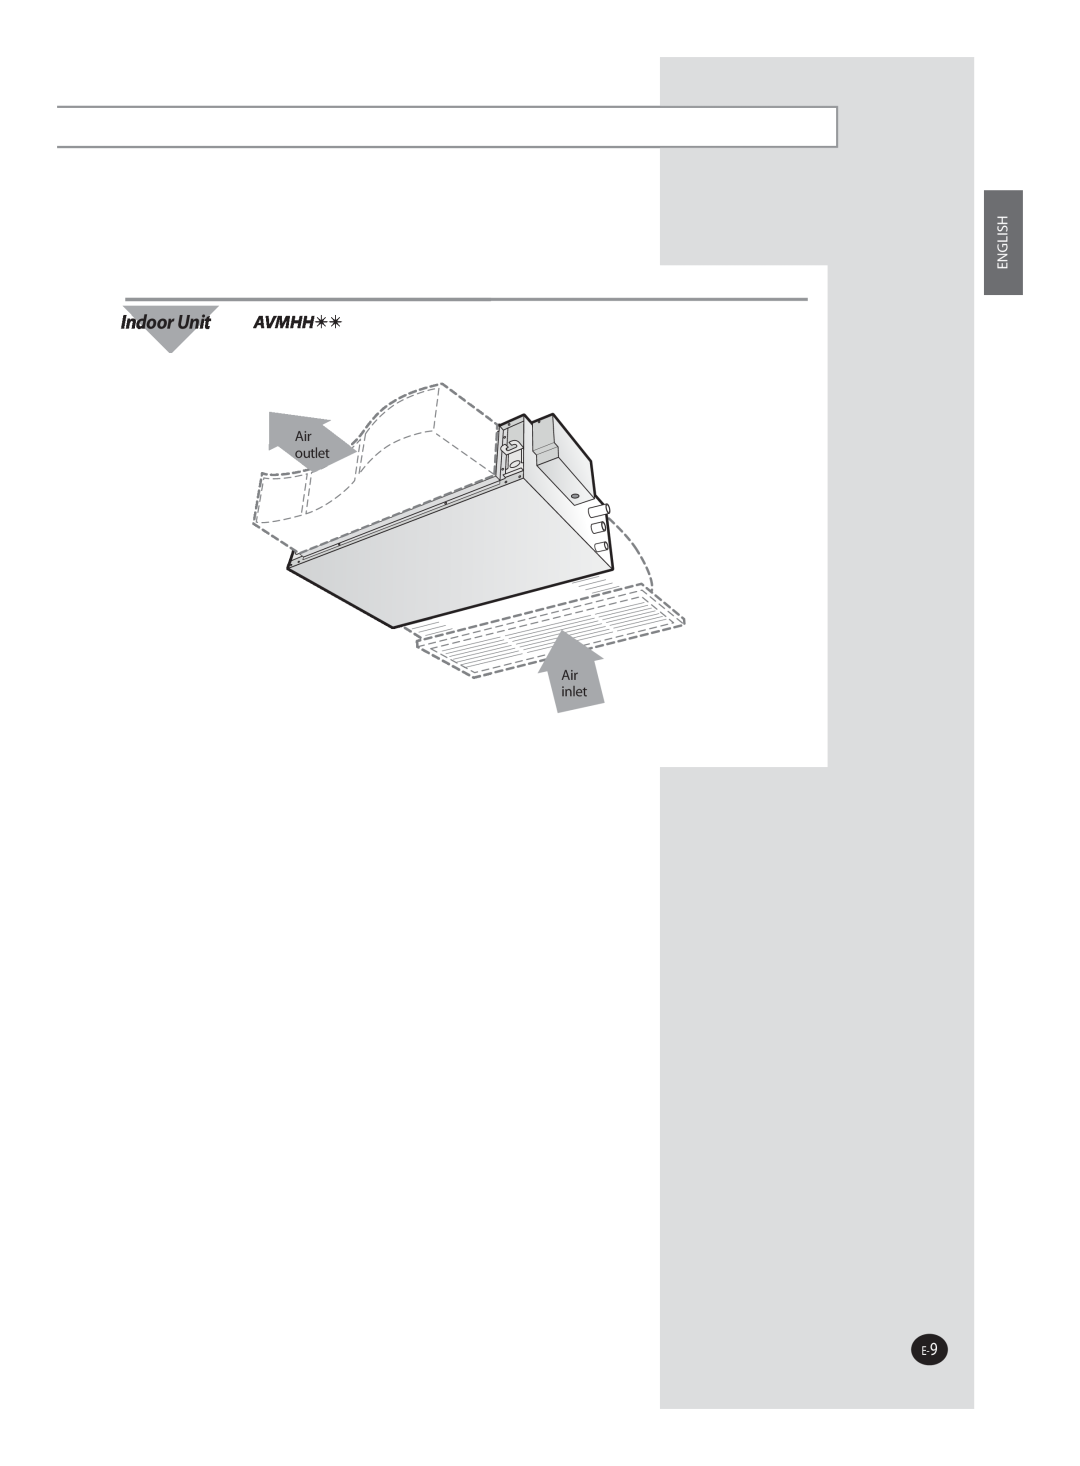 Samsung AVMDH user manual Indoor Unit AVMHH, English, Air outlet Air inlet 